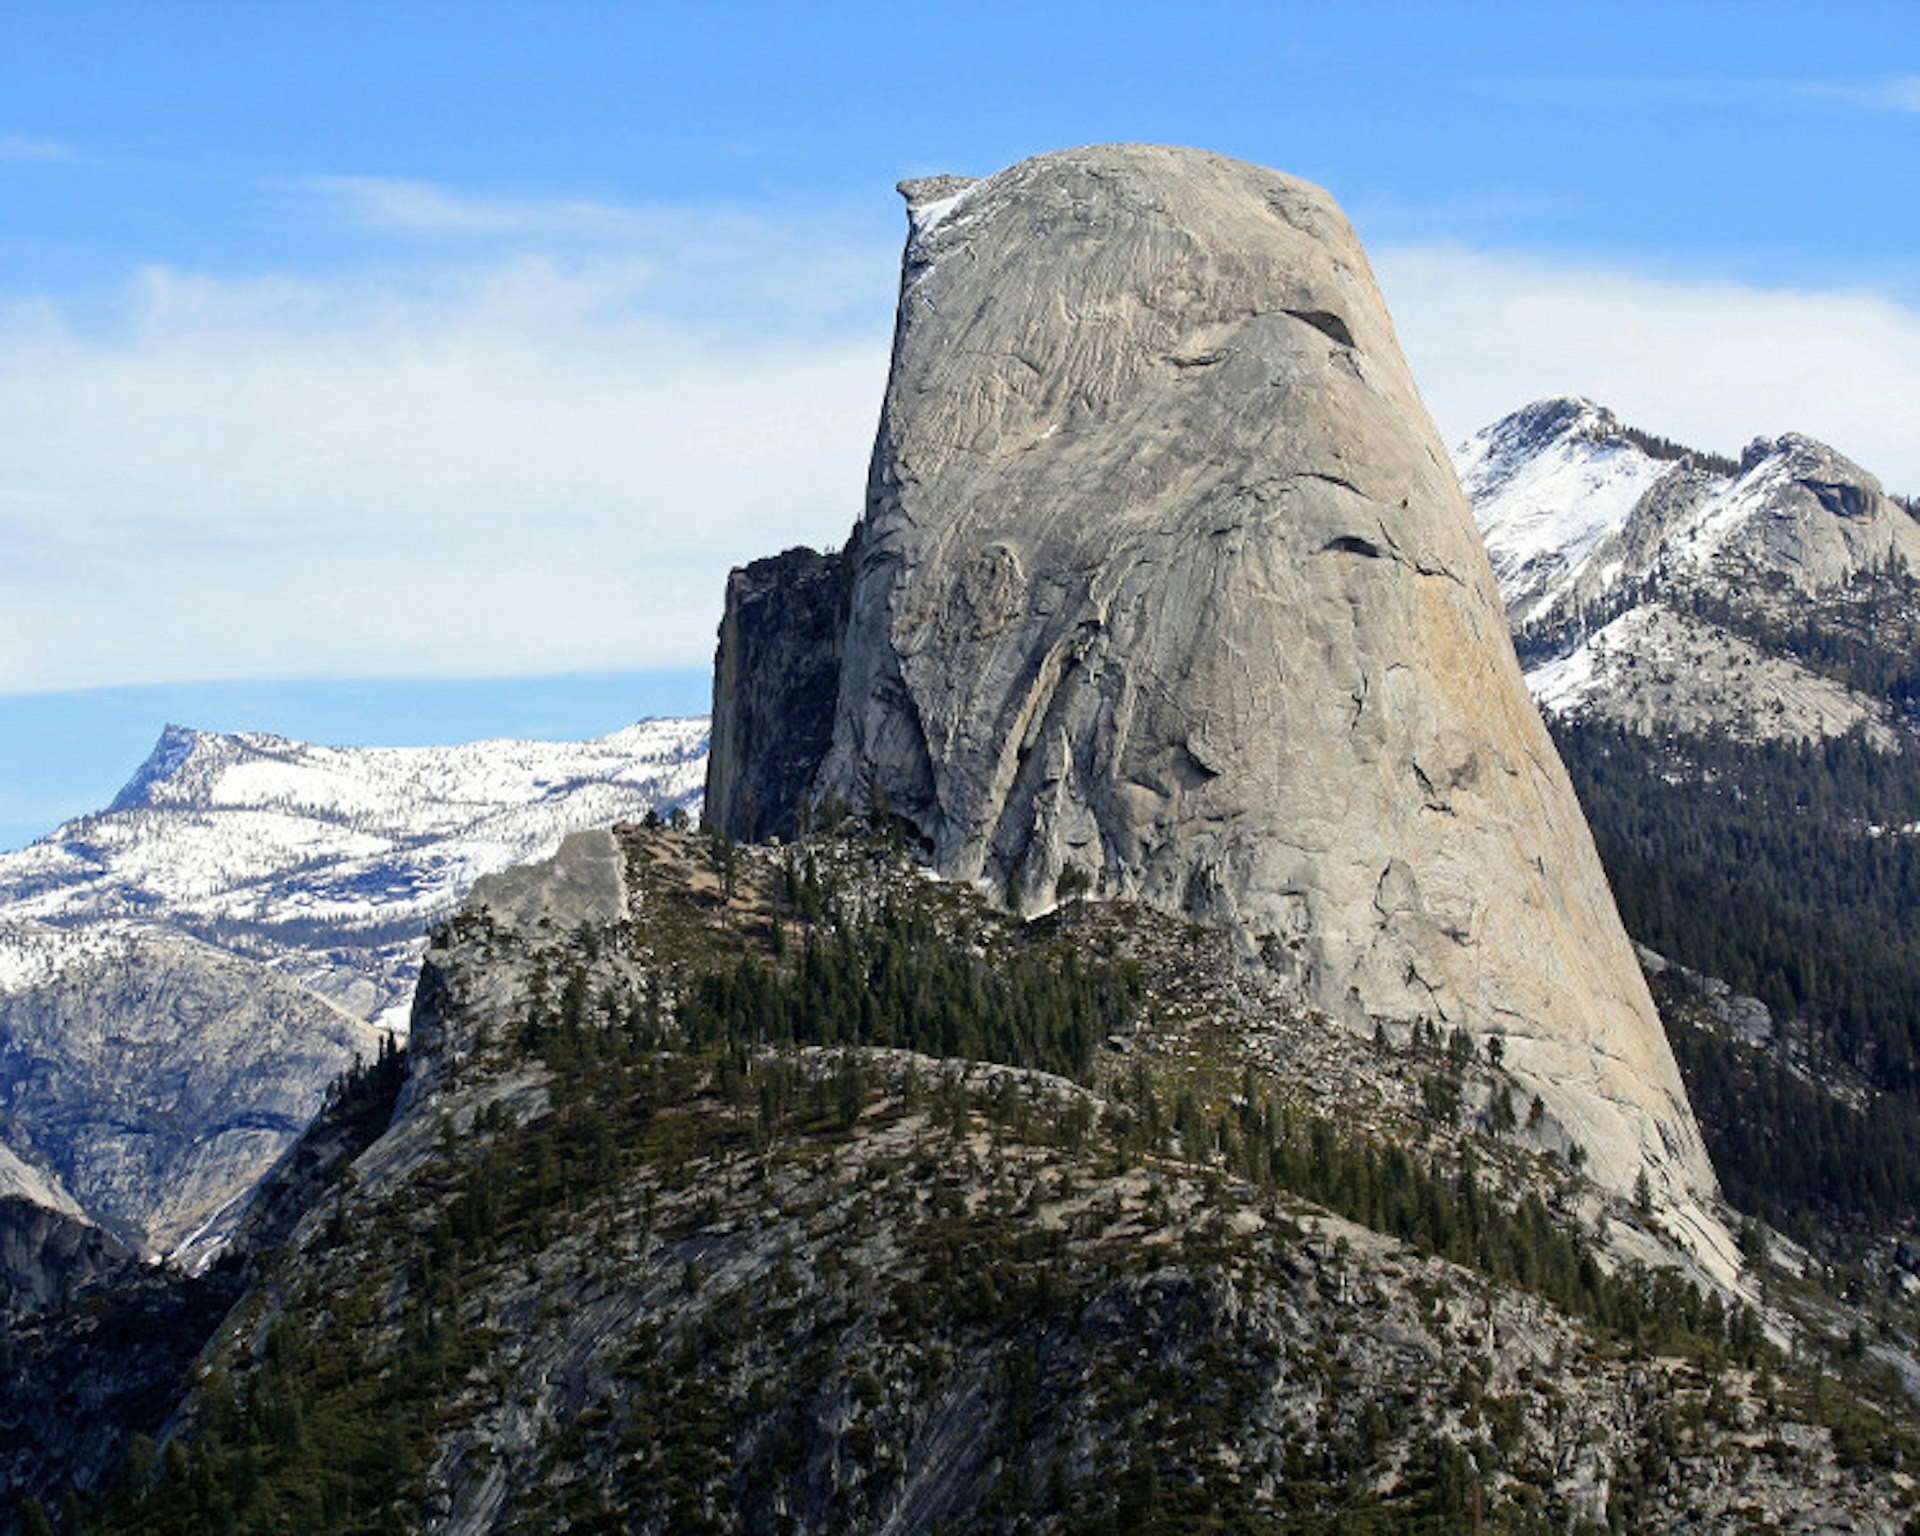 Get up close and personal with Half Dome, Yosemite's most iconic peak. Image by Dimitry B. / CC BY 2.0